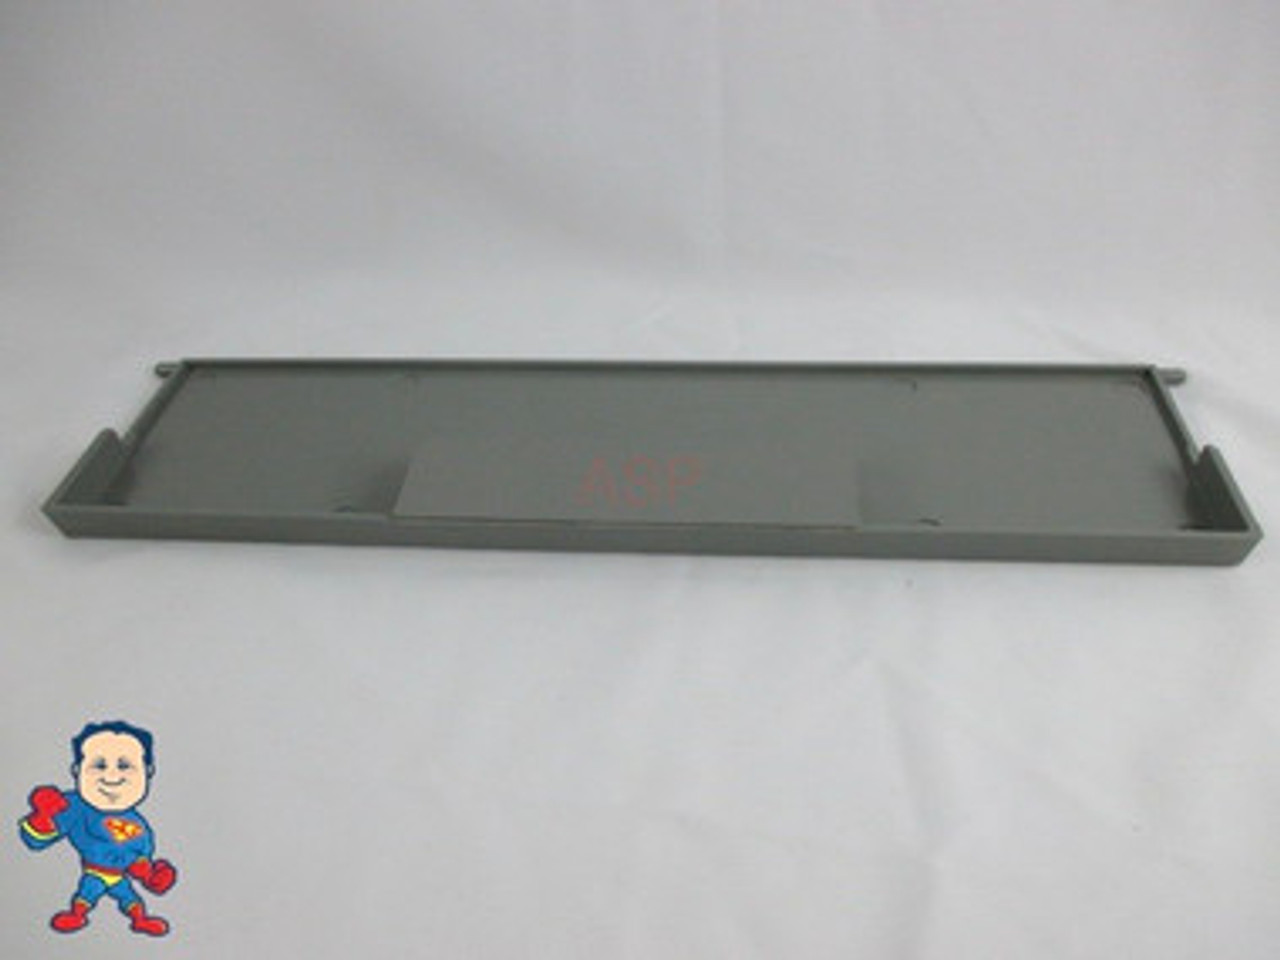 Weir, Dual Port, Gray Weir Swing Door Style, For La Spa and Advantage